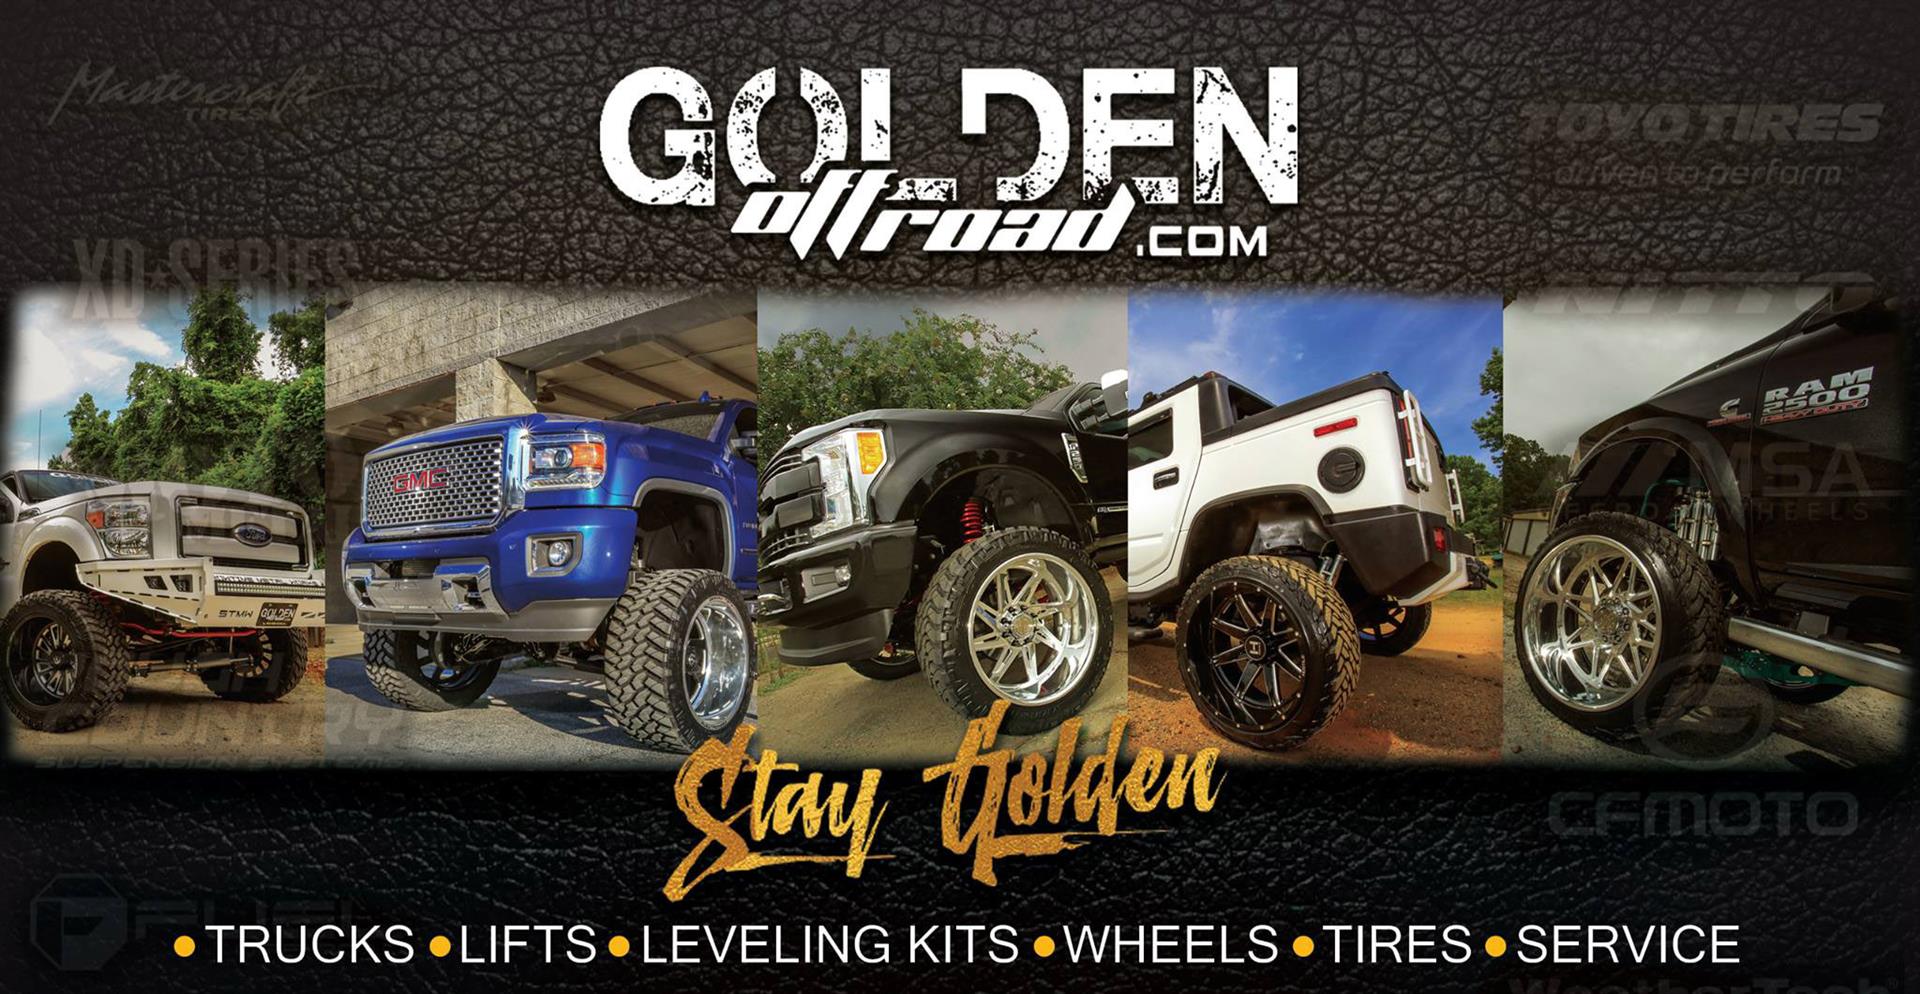 Golden Offroad vehicle collage, trucks, lifts, leveling kits, wheels, tires, service